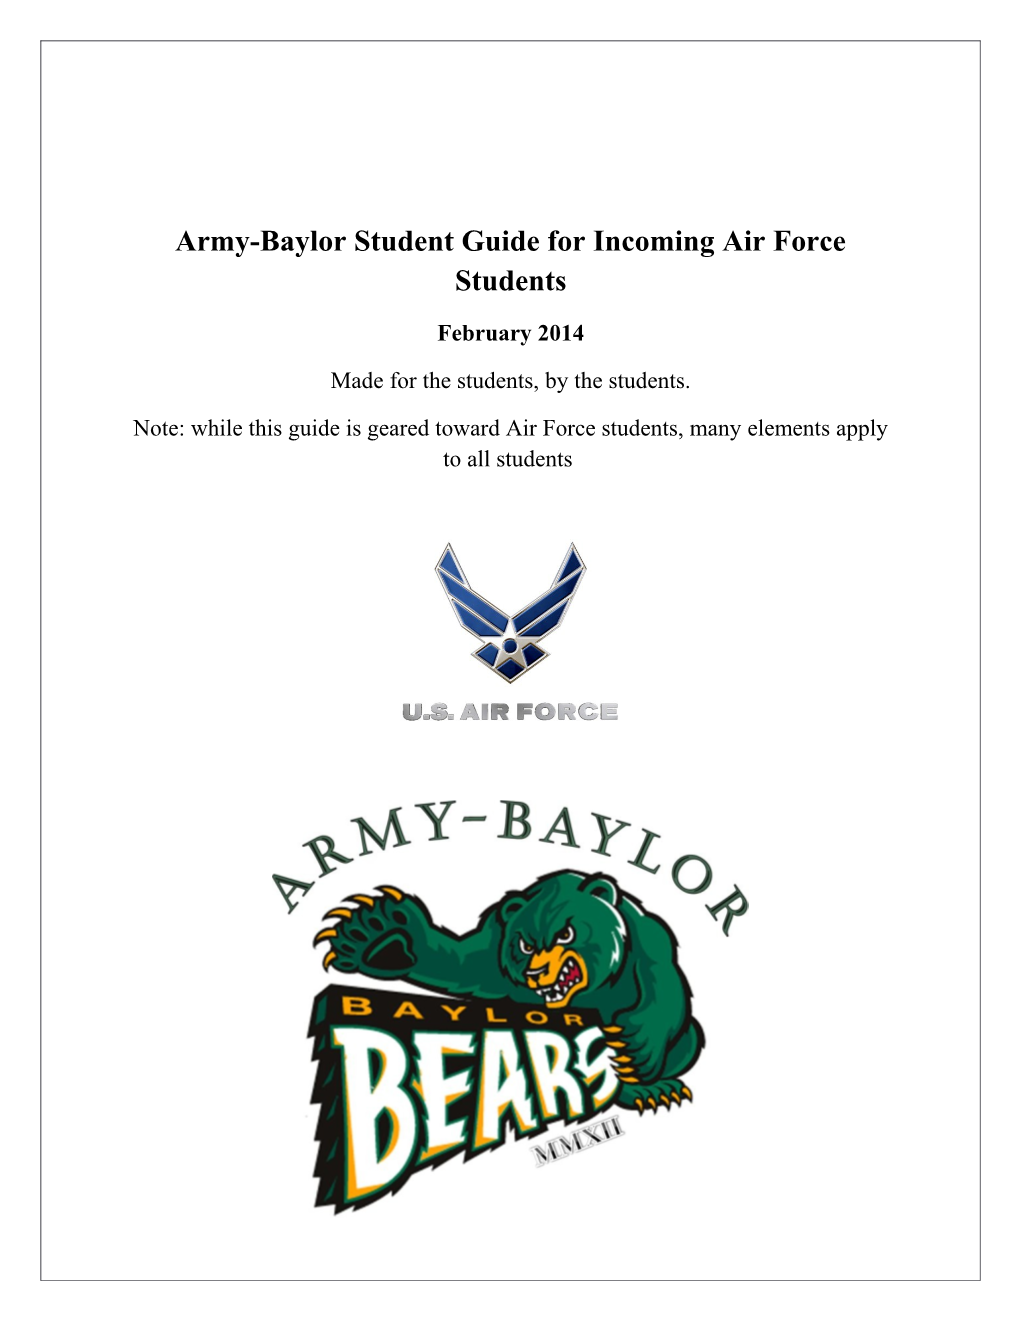 Army-Baylor Student Guide for Incoming Air Force Students